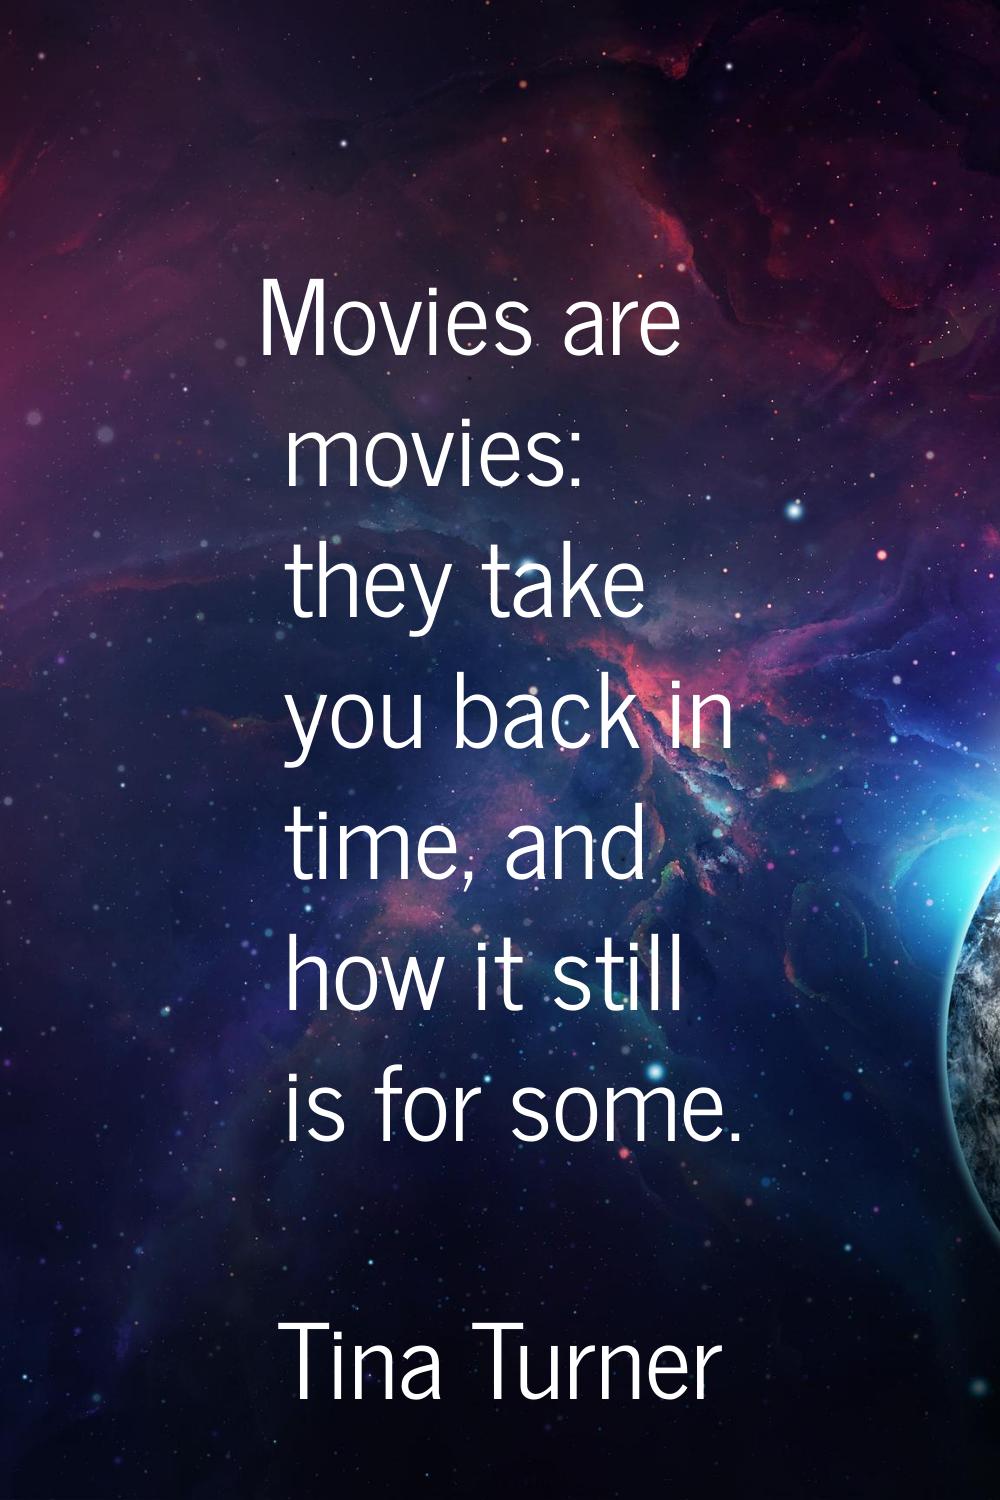 Movies are movies: they take you back in time, and how it still is for some.